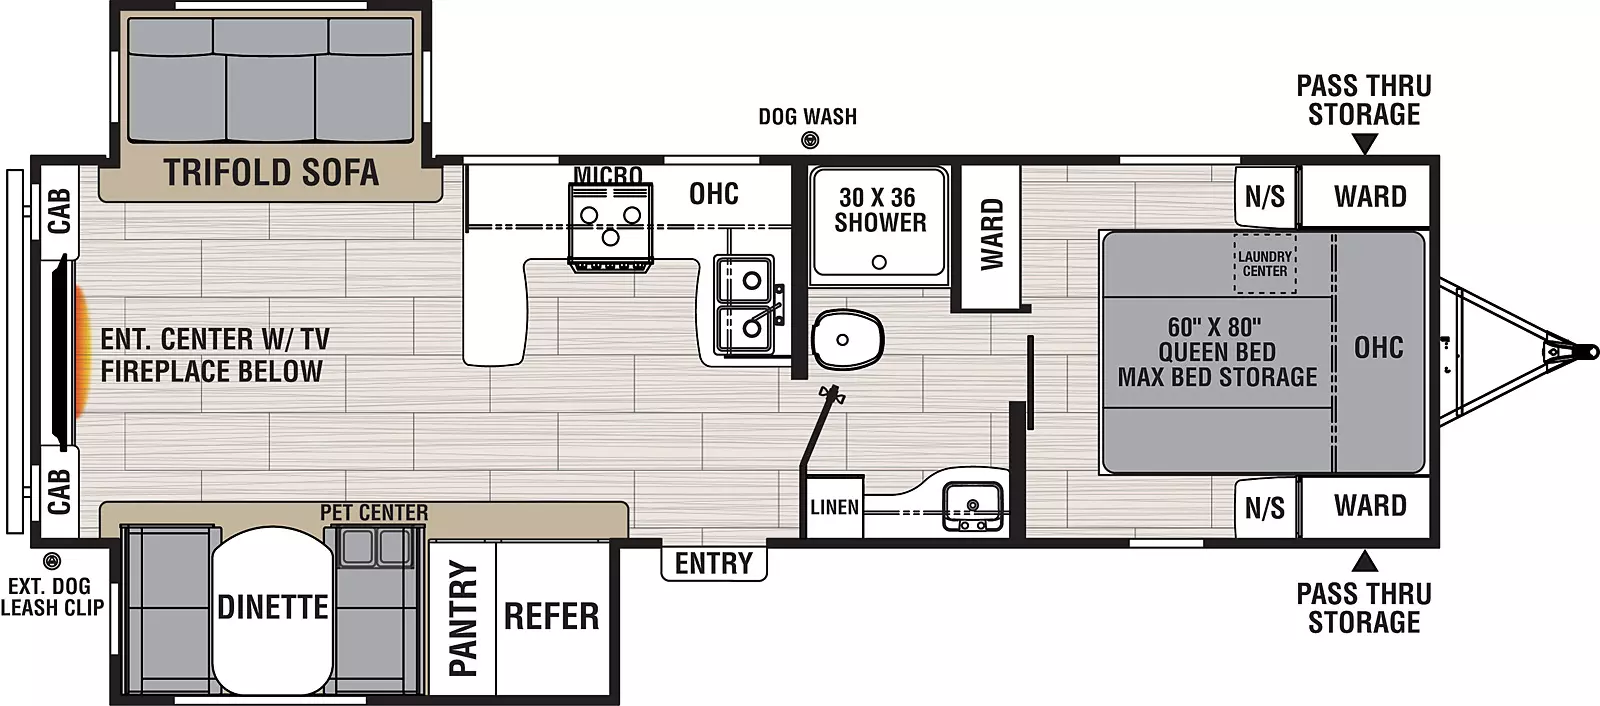 The 2764RE has one slide out on the off-door side, and one slide out and entry door on the door side. Interior layout from front to back: front bedroom with foot queen bed containing max bed storage, overhead cabinet, and wardrobes on either side of the bed and wardrobe; mid bathroom with entry to bedroom and living area includes shower, toilet, sink and linen cabinet; off-door side kitchen with sink, stovetop, microwave and overhead cabinets; door side slide out with refrigerator, pantry and dinette with pet center; off-door side slide out with tri-fold sofa; rear entertainment center with TV and fireplace below and cabinets on either side.